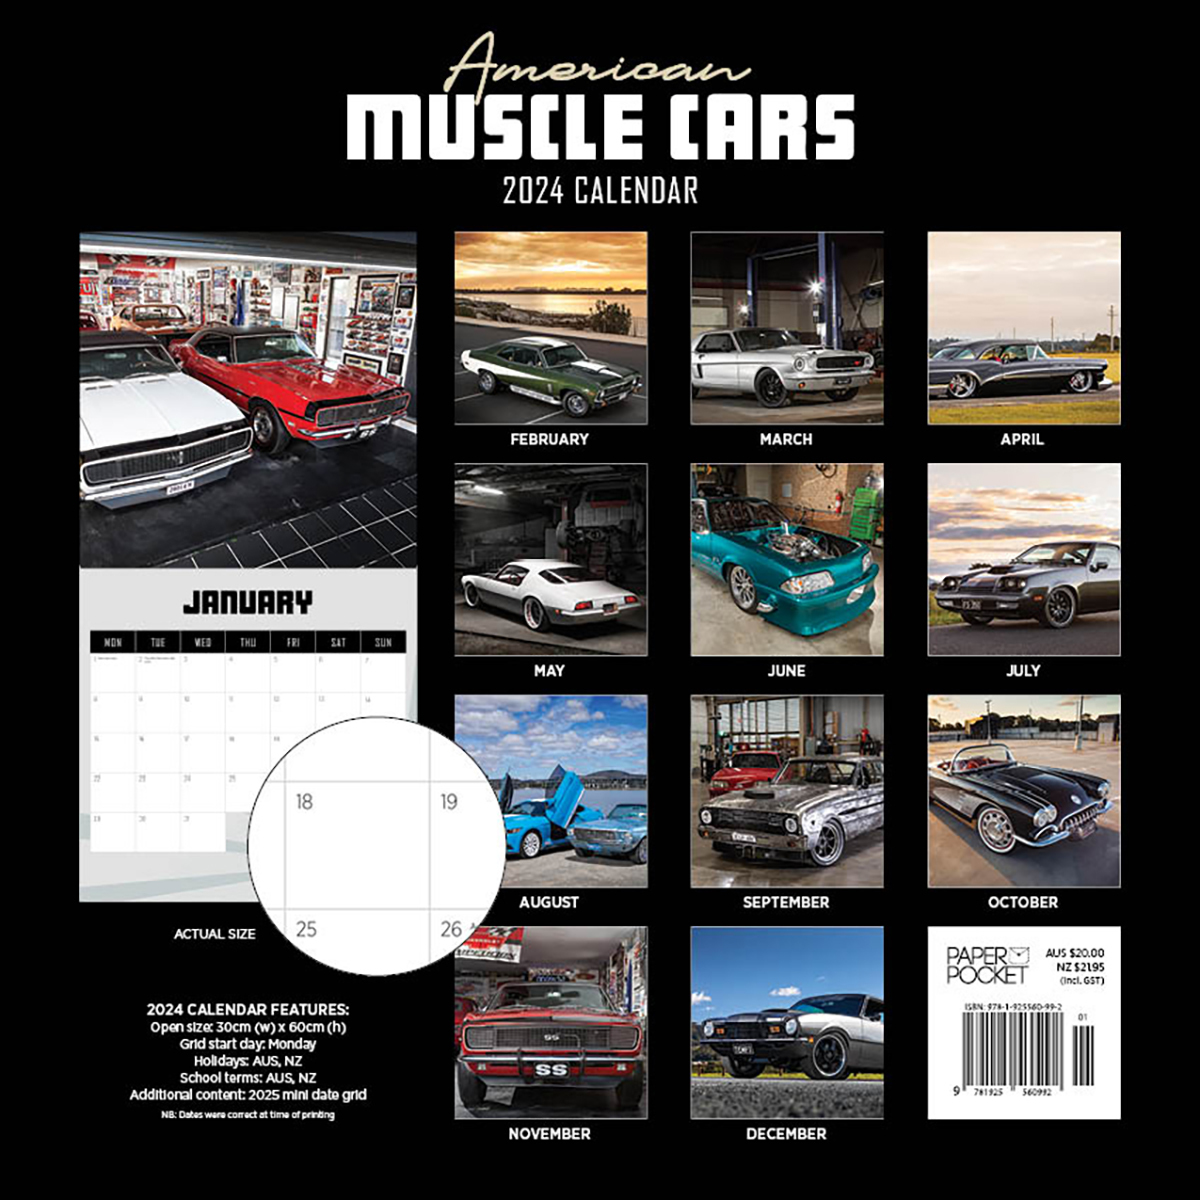 2020-american-muscle-cars-square-wall-calendar-by-paper-pocket-17070-paper-pocket-universal